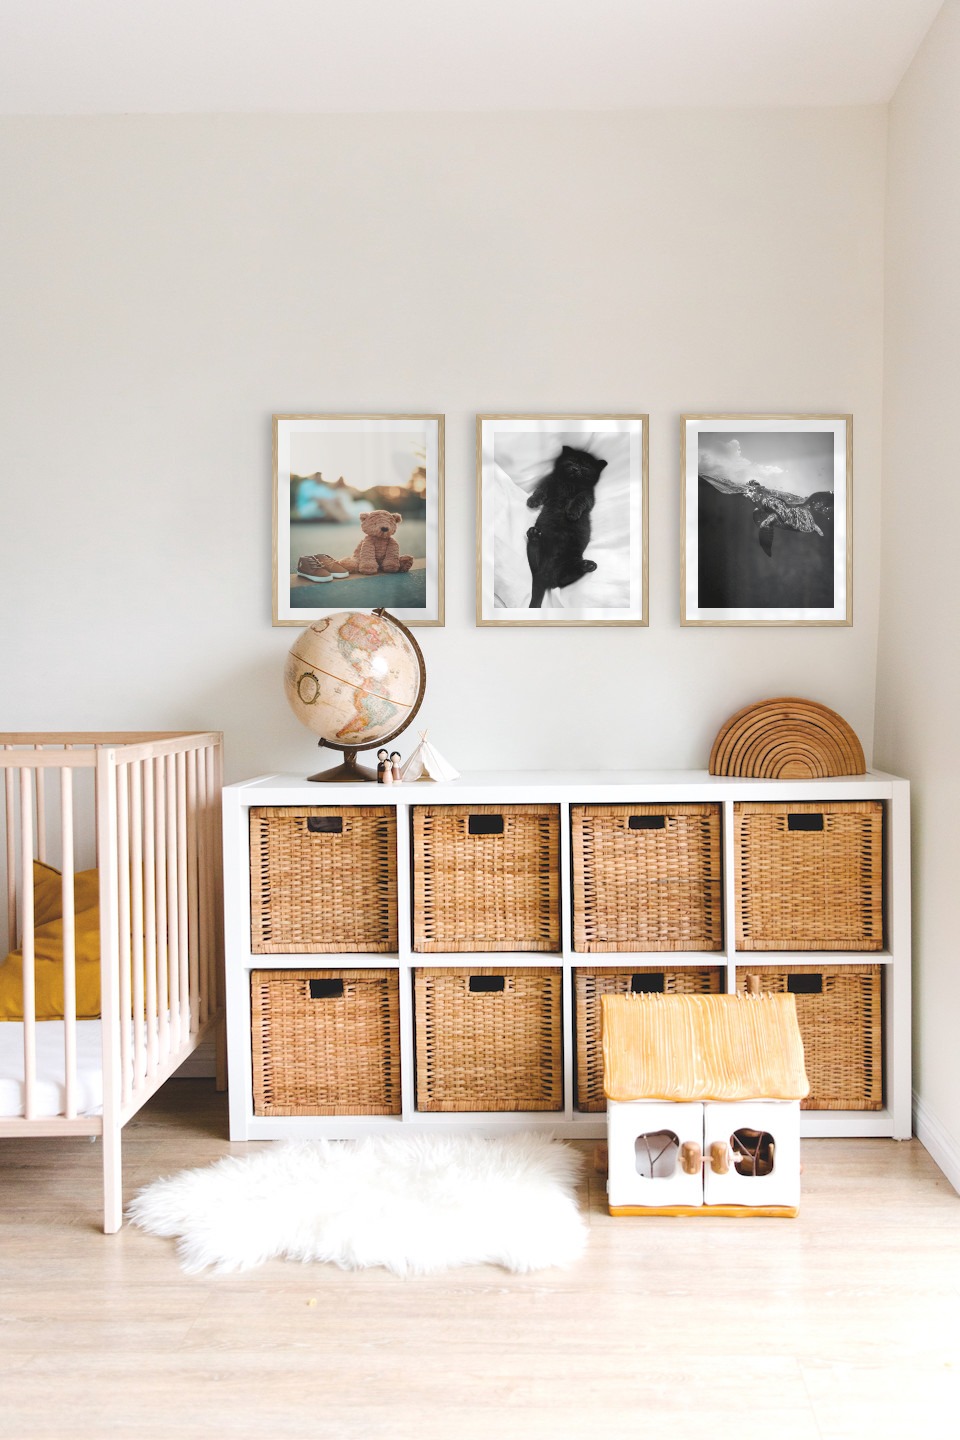 Gallery wall with picture frames in wood in sizes 40x50 with prints "Teddy bear on the street", "Cat in bed" and "Turtle"